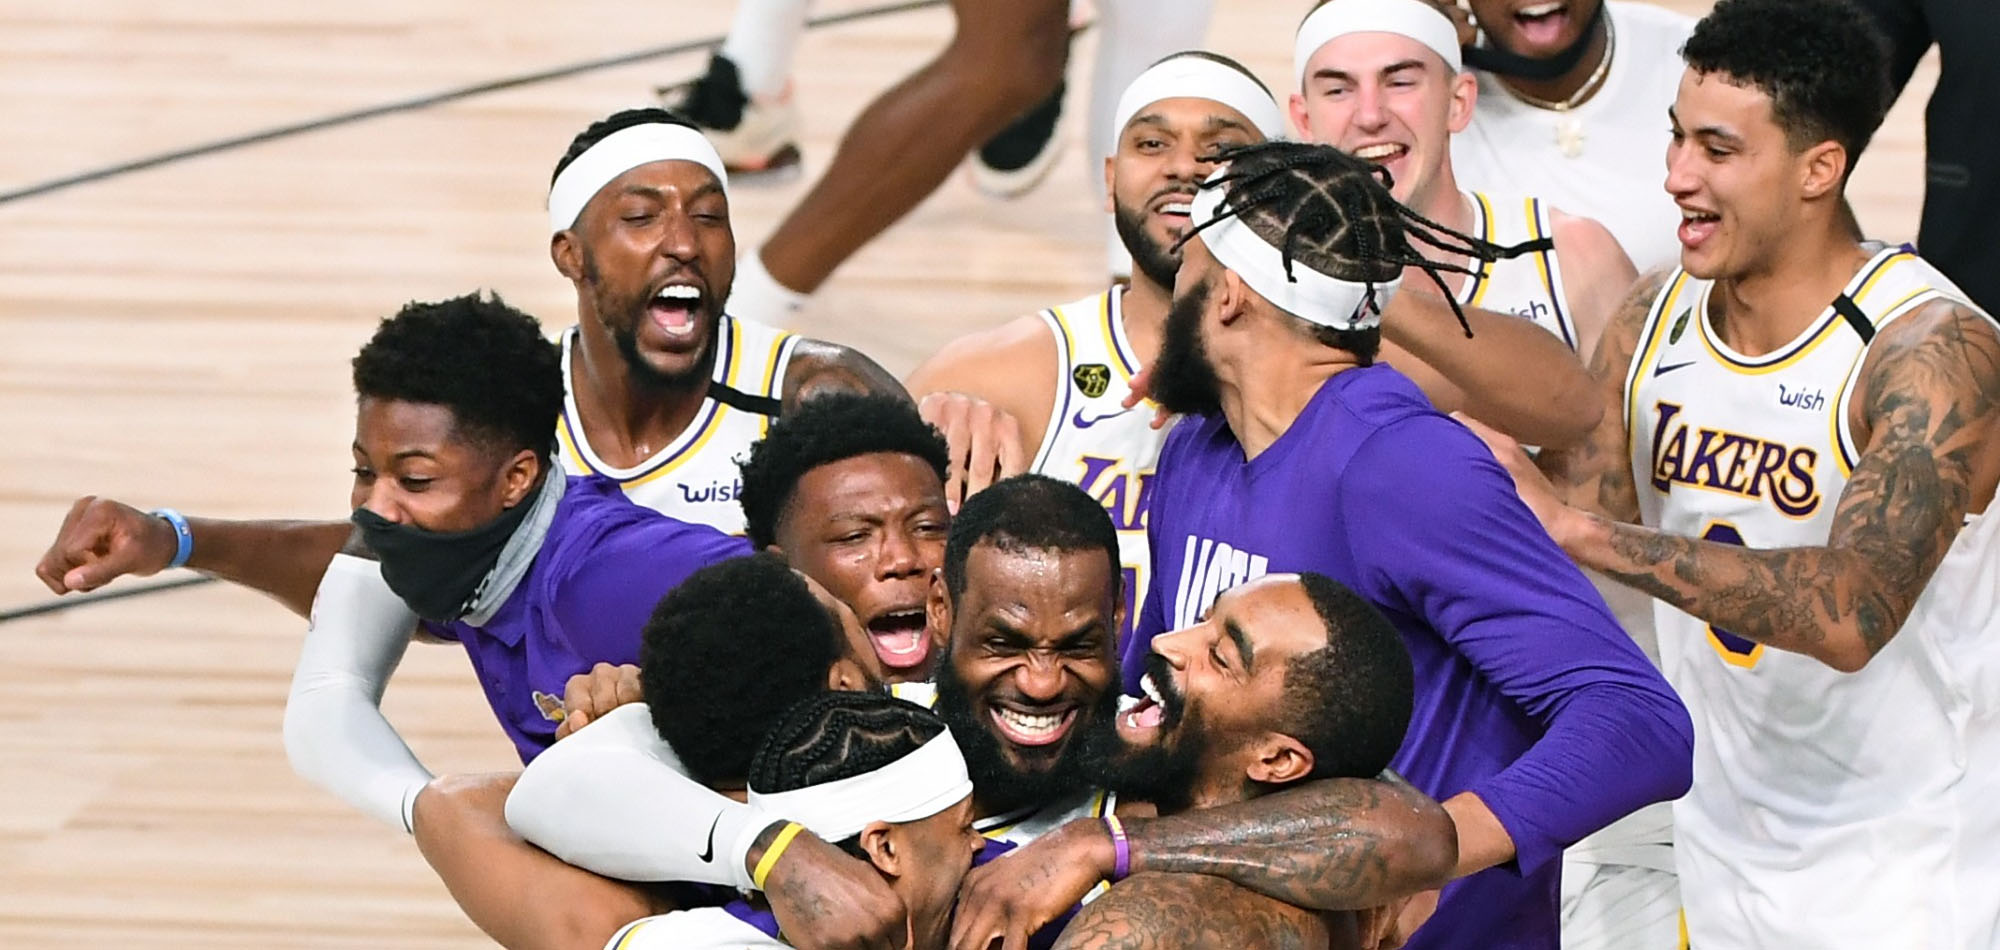 Los Angeles Lakers earn their first championship in 10-years, Lebron wins his 4th ring and Finals MVP